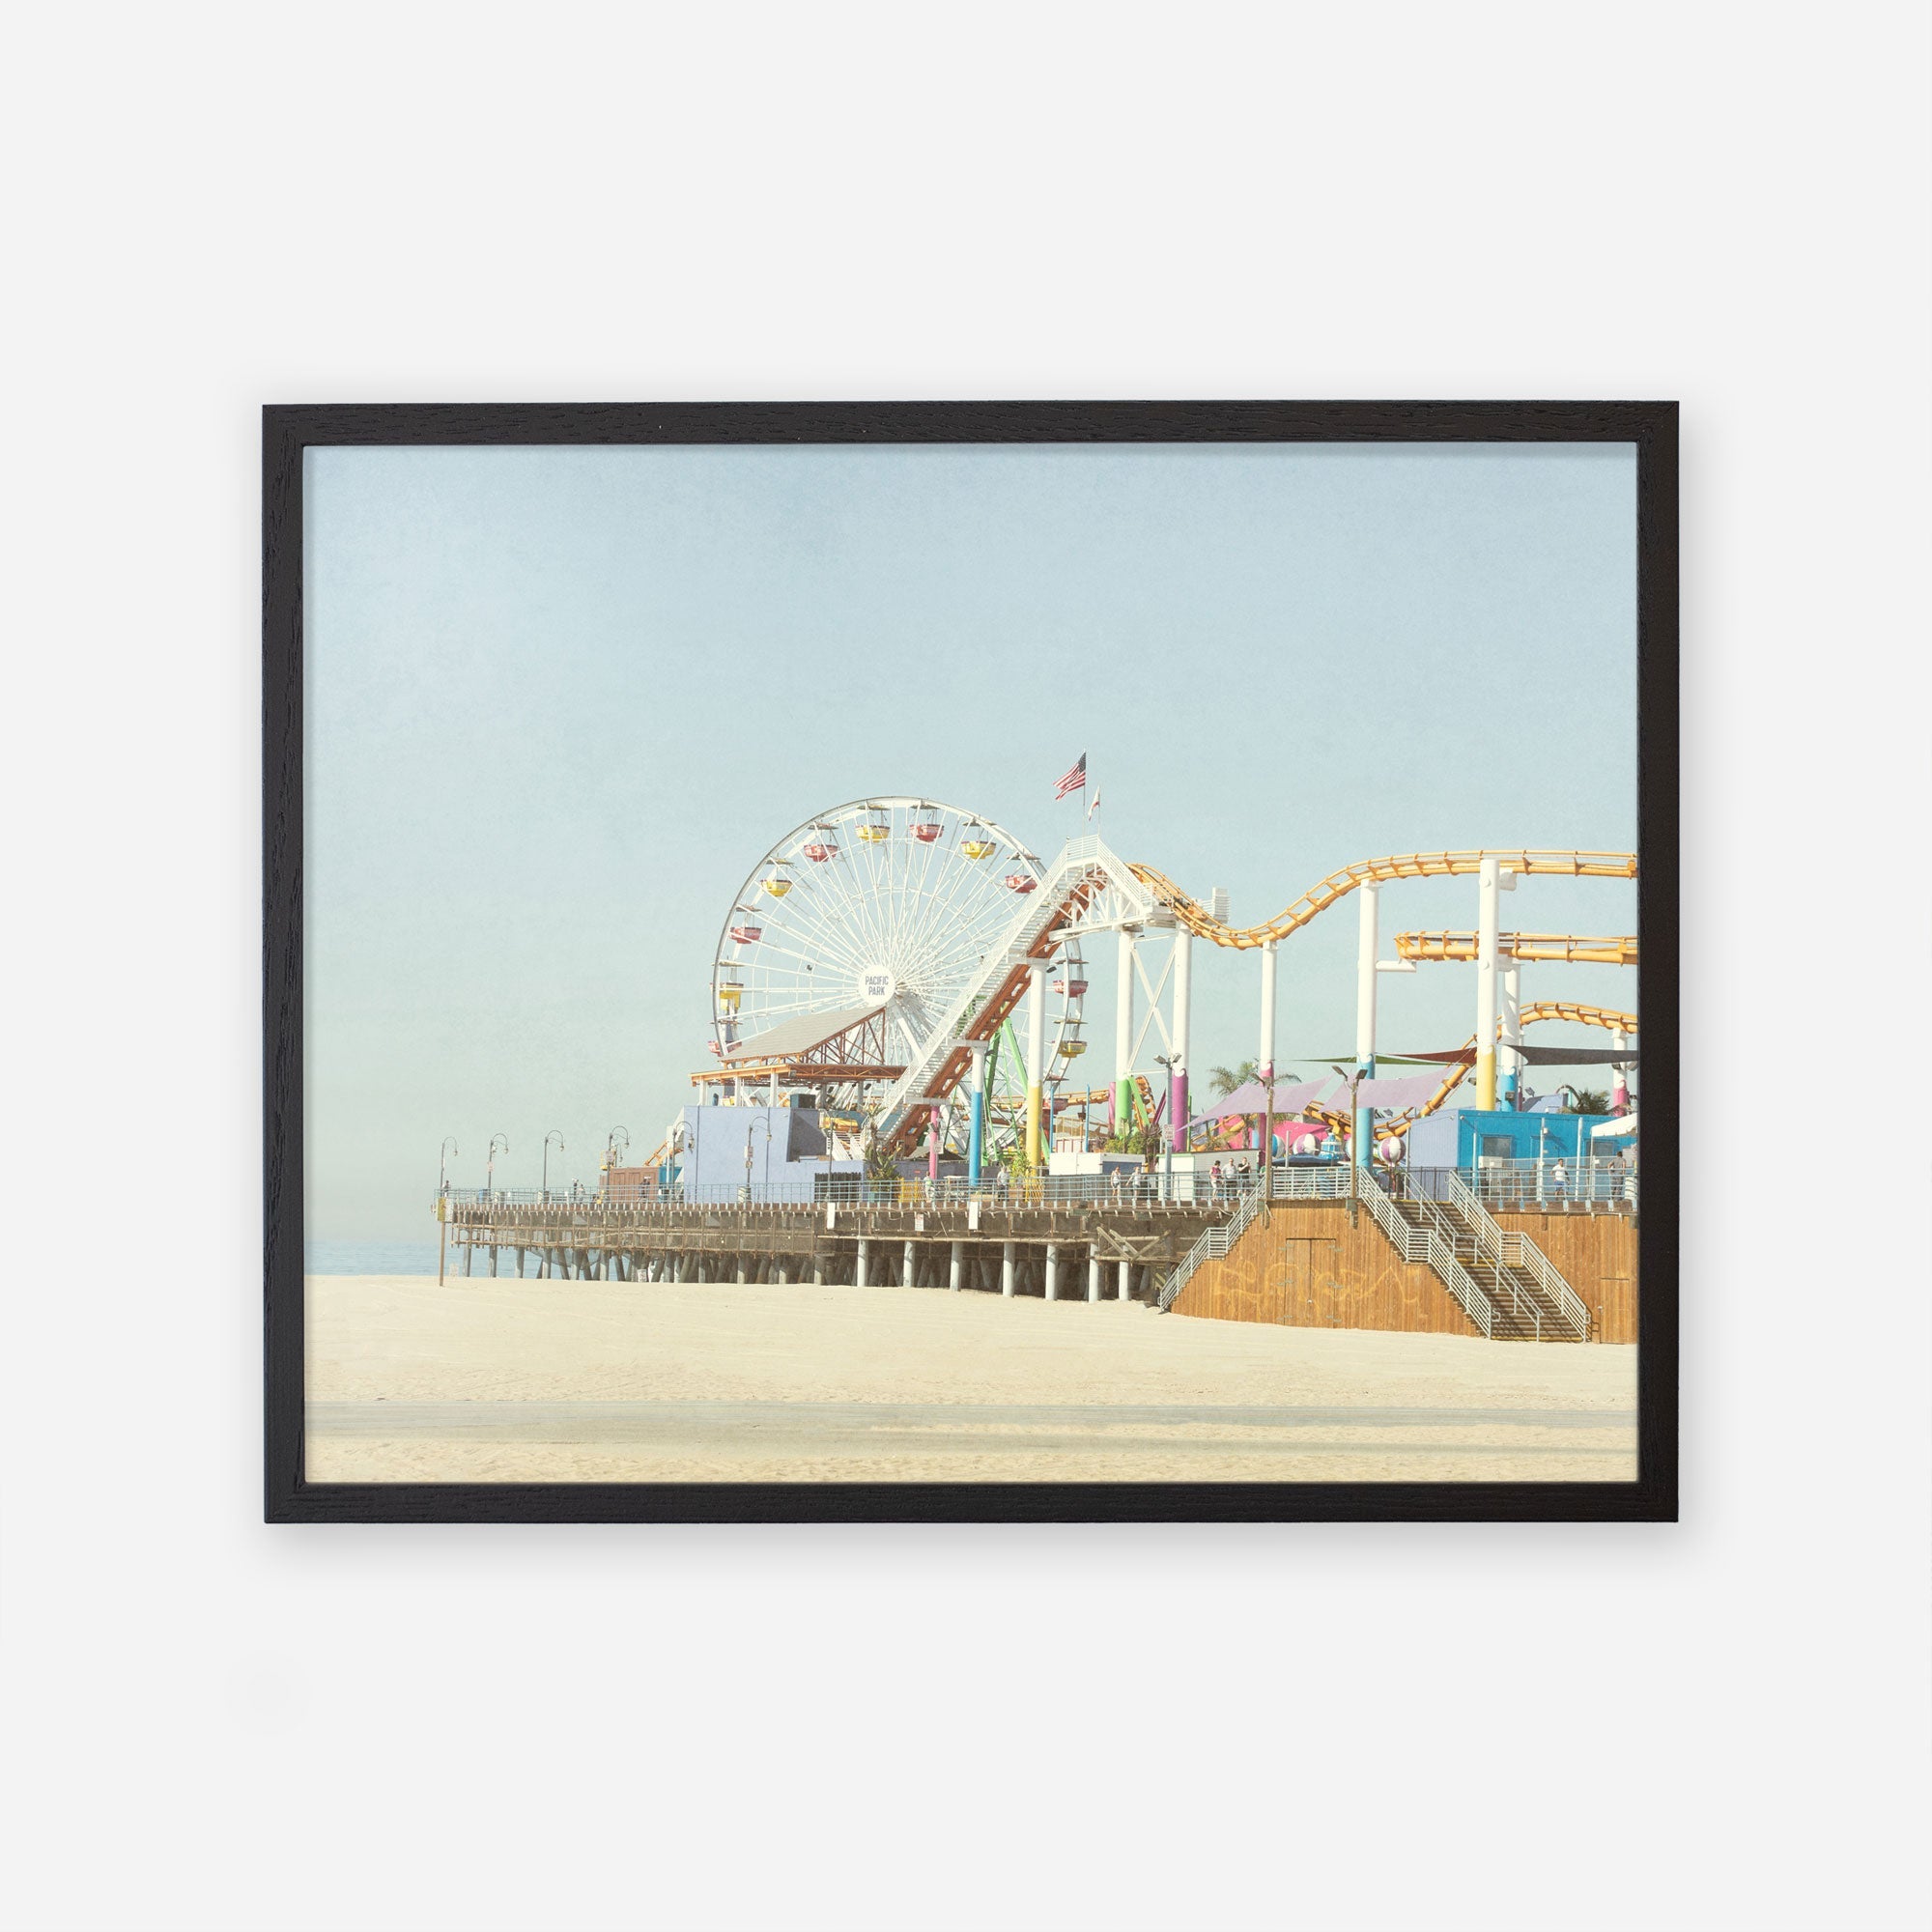 A framed Offley Green California Print, &#39;Santa Monica Pier&#39; on archival photographic paper depicting Santa Monica Pier with a ferris wheel and roller coaster, set against a clear sky.